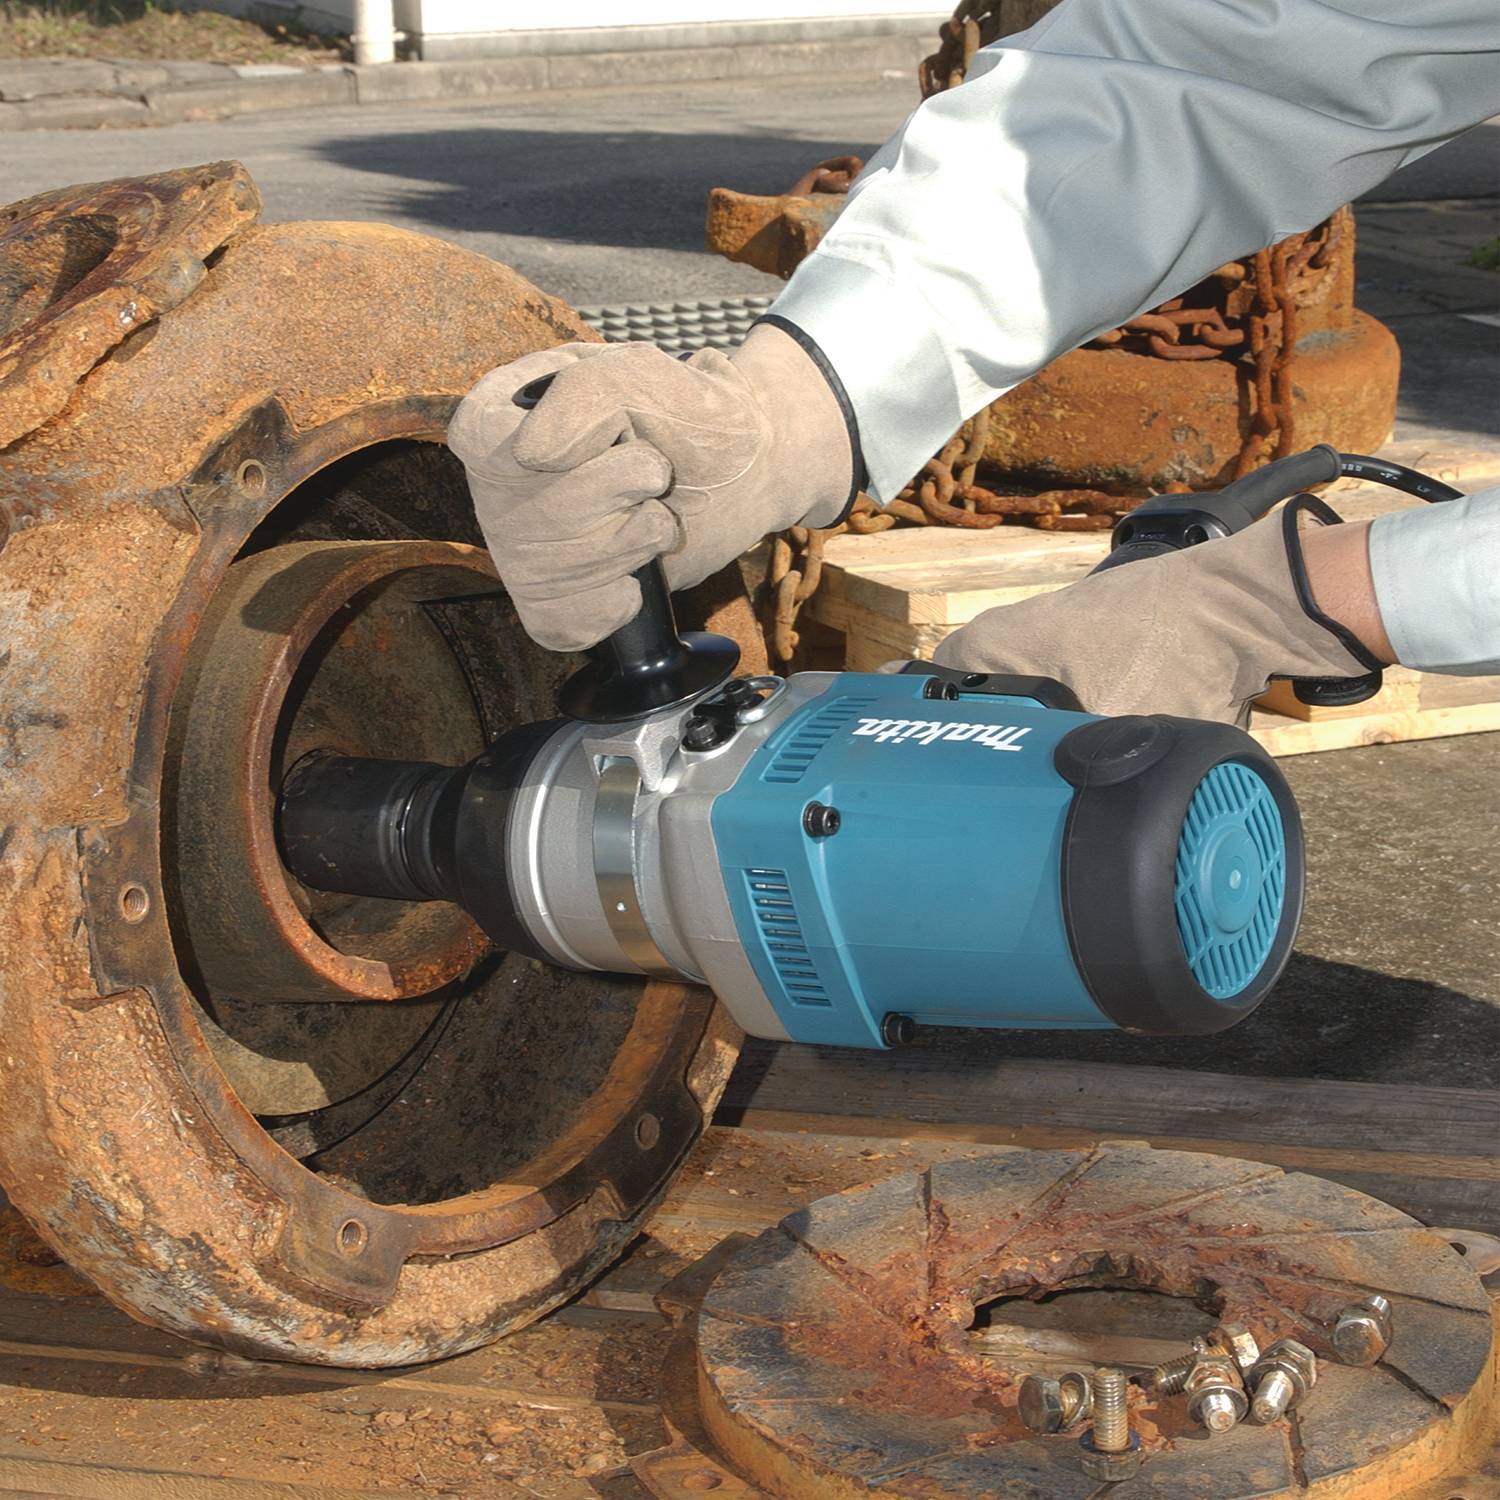 Makita Tw1000 Impact Wrench Power Tool Services